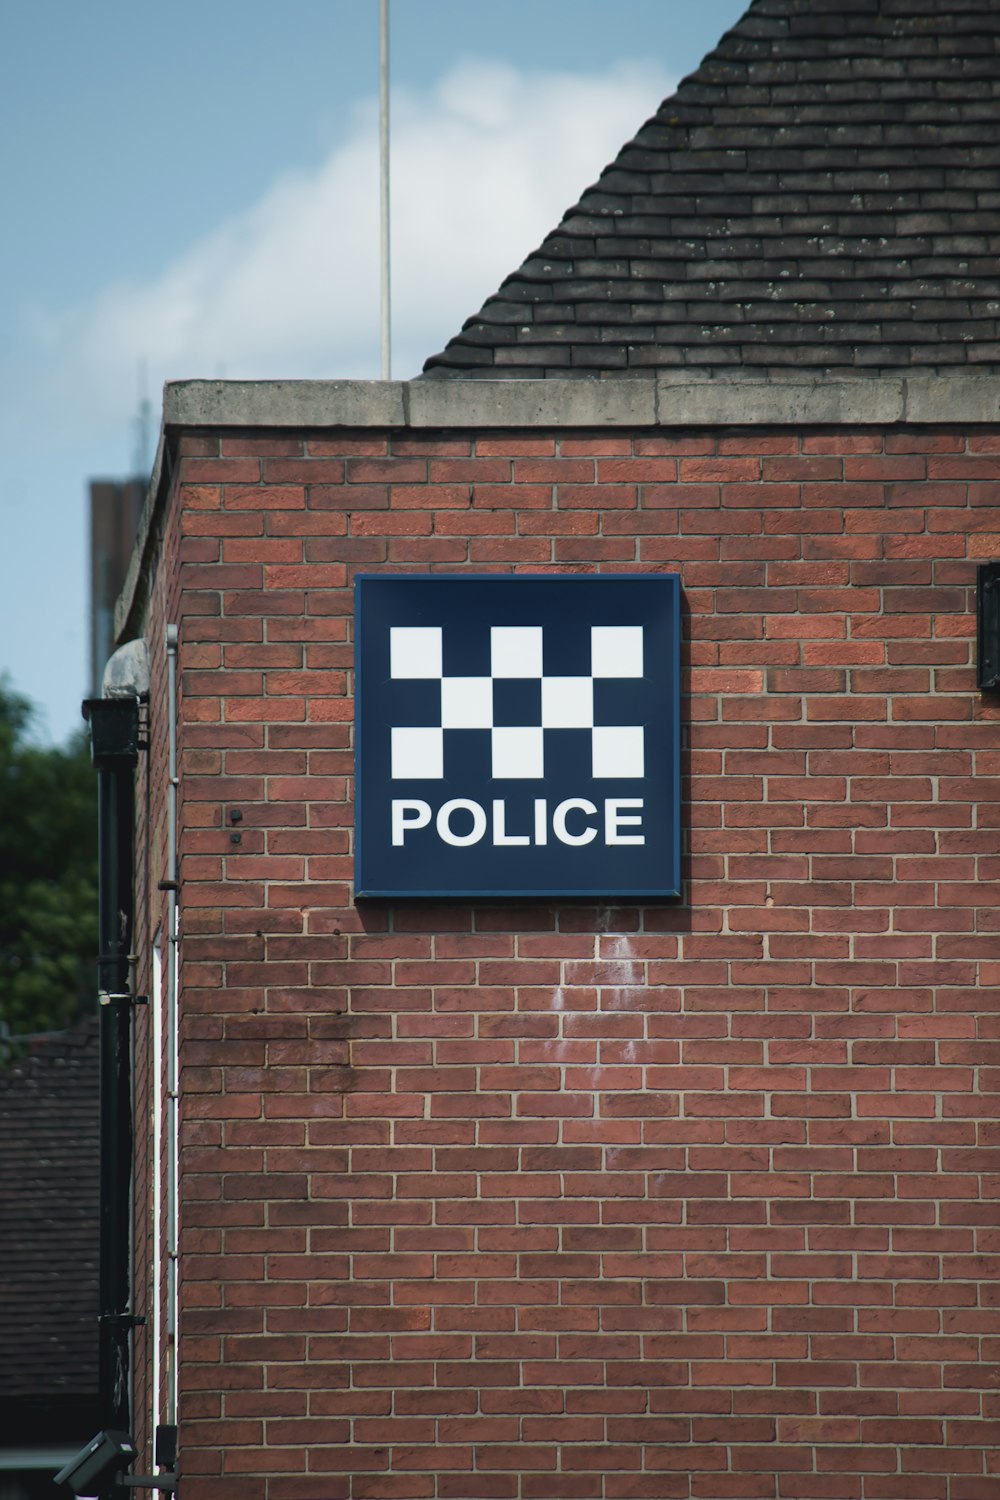 a police sign on the side of a brick building